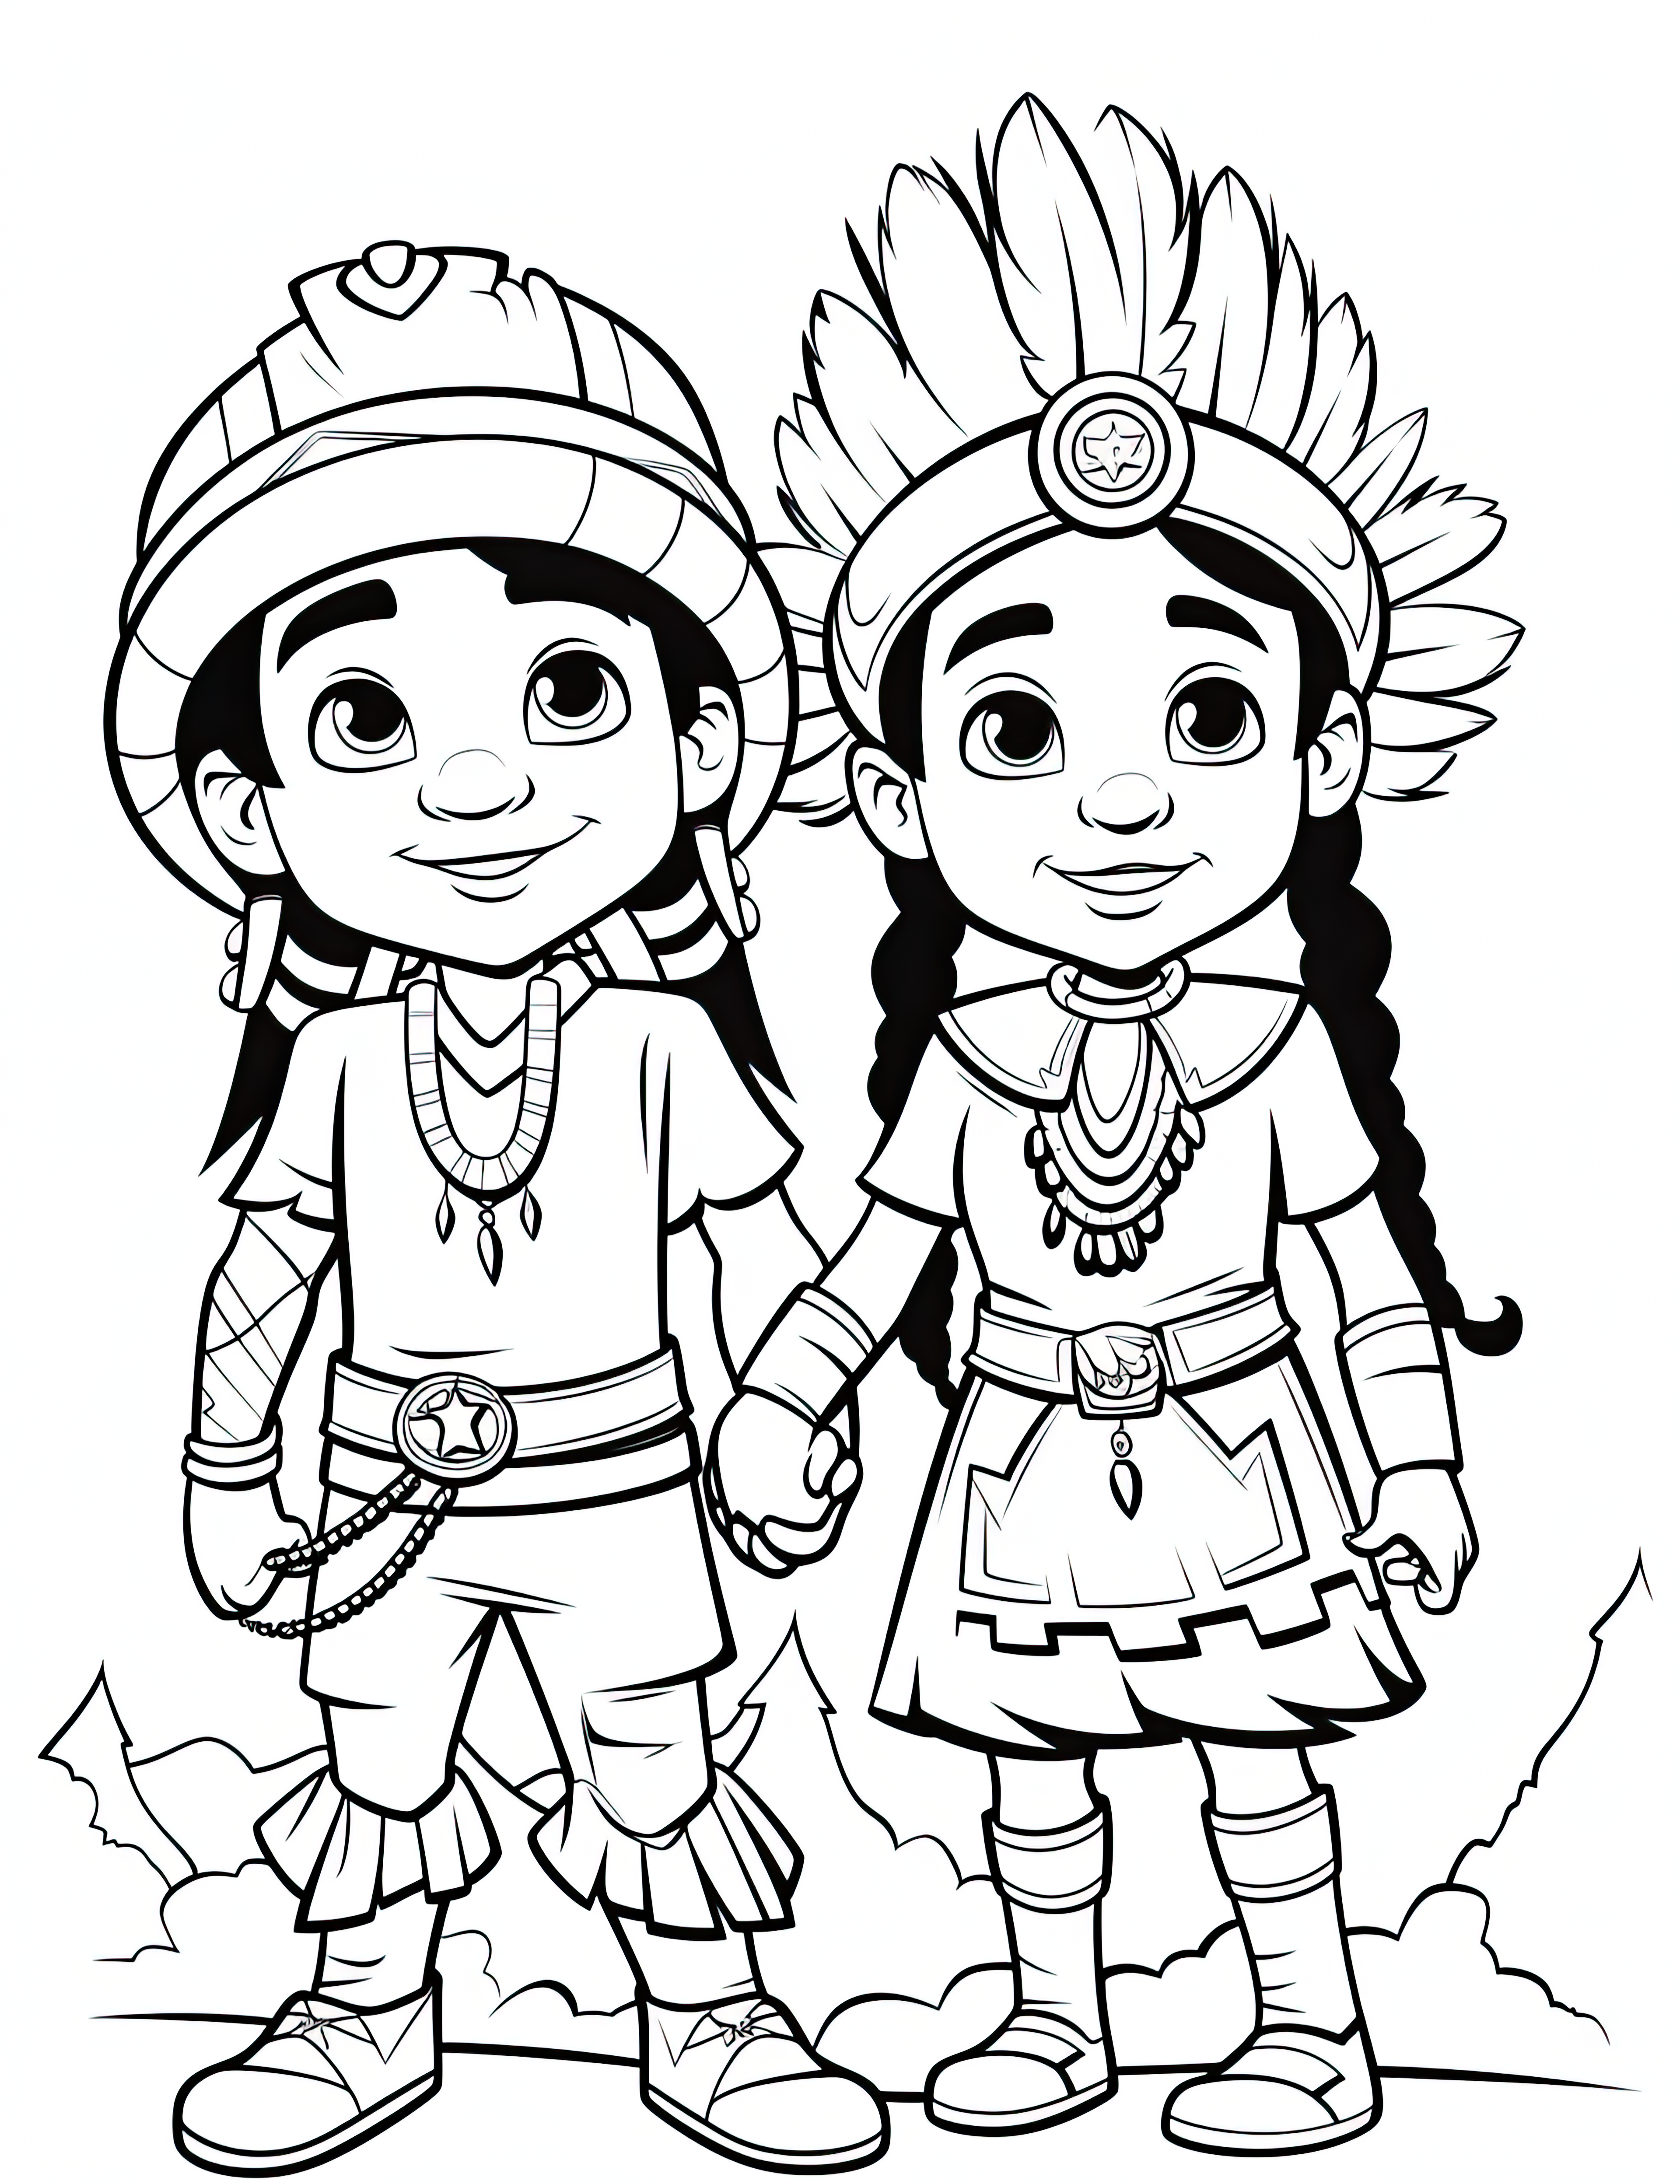 Cheerful Pilgrim and Native American Kids Coloring Page